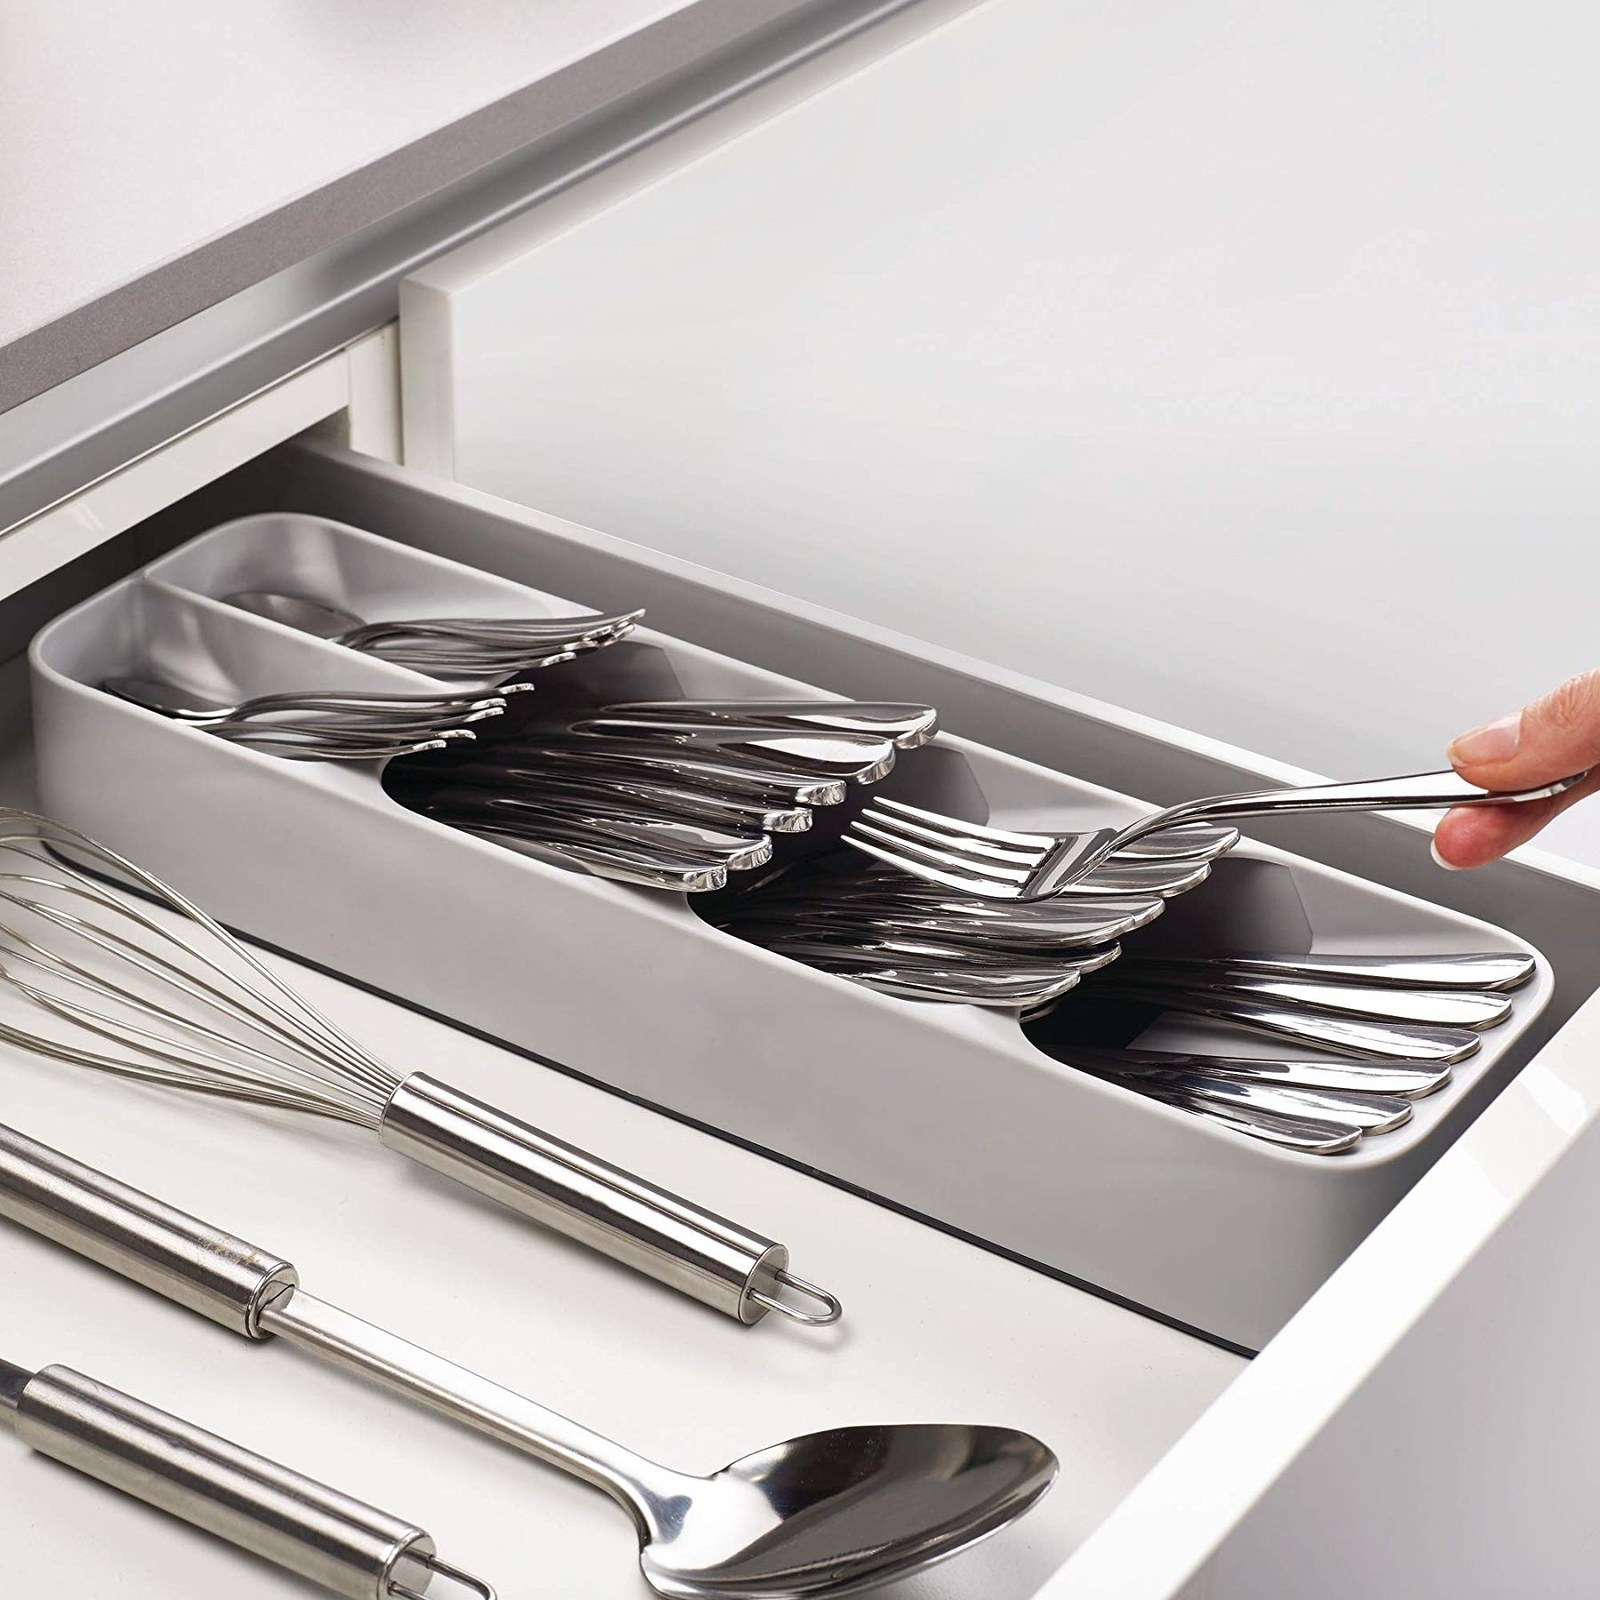 Hand putting a fork into the organizing tray 